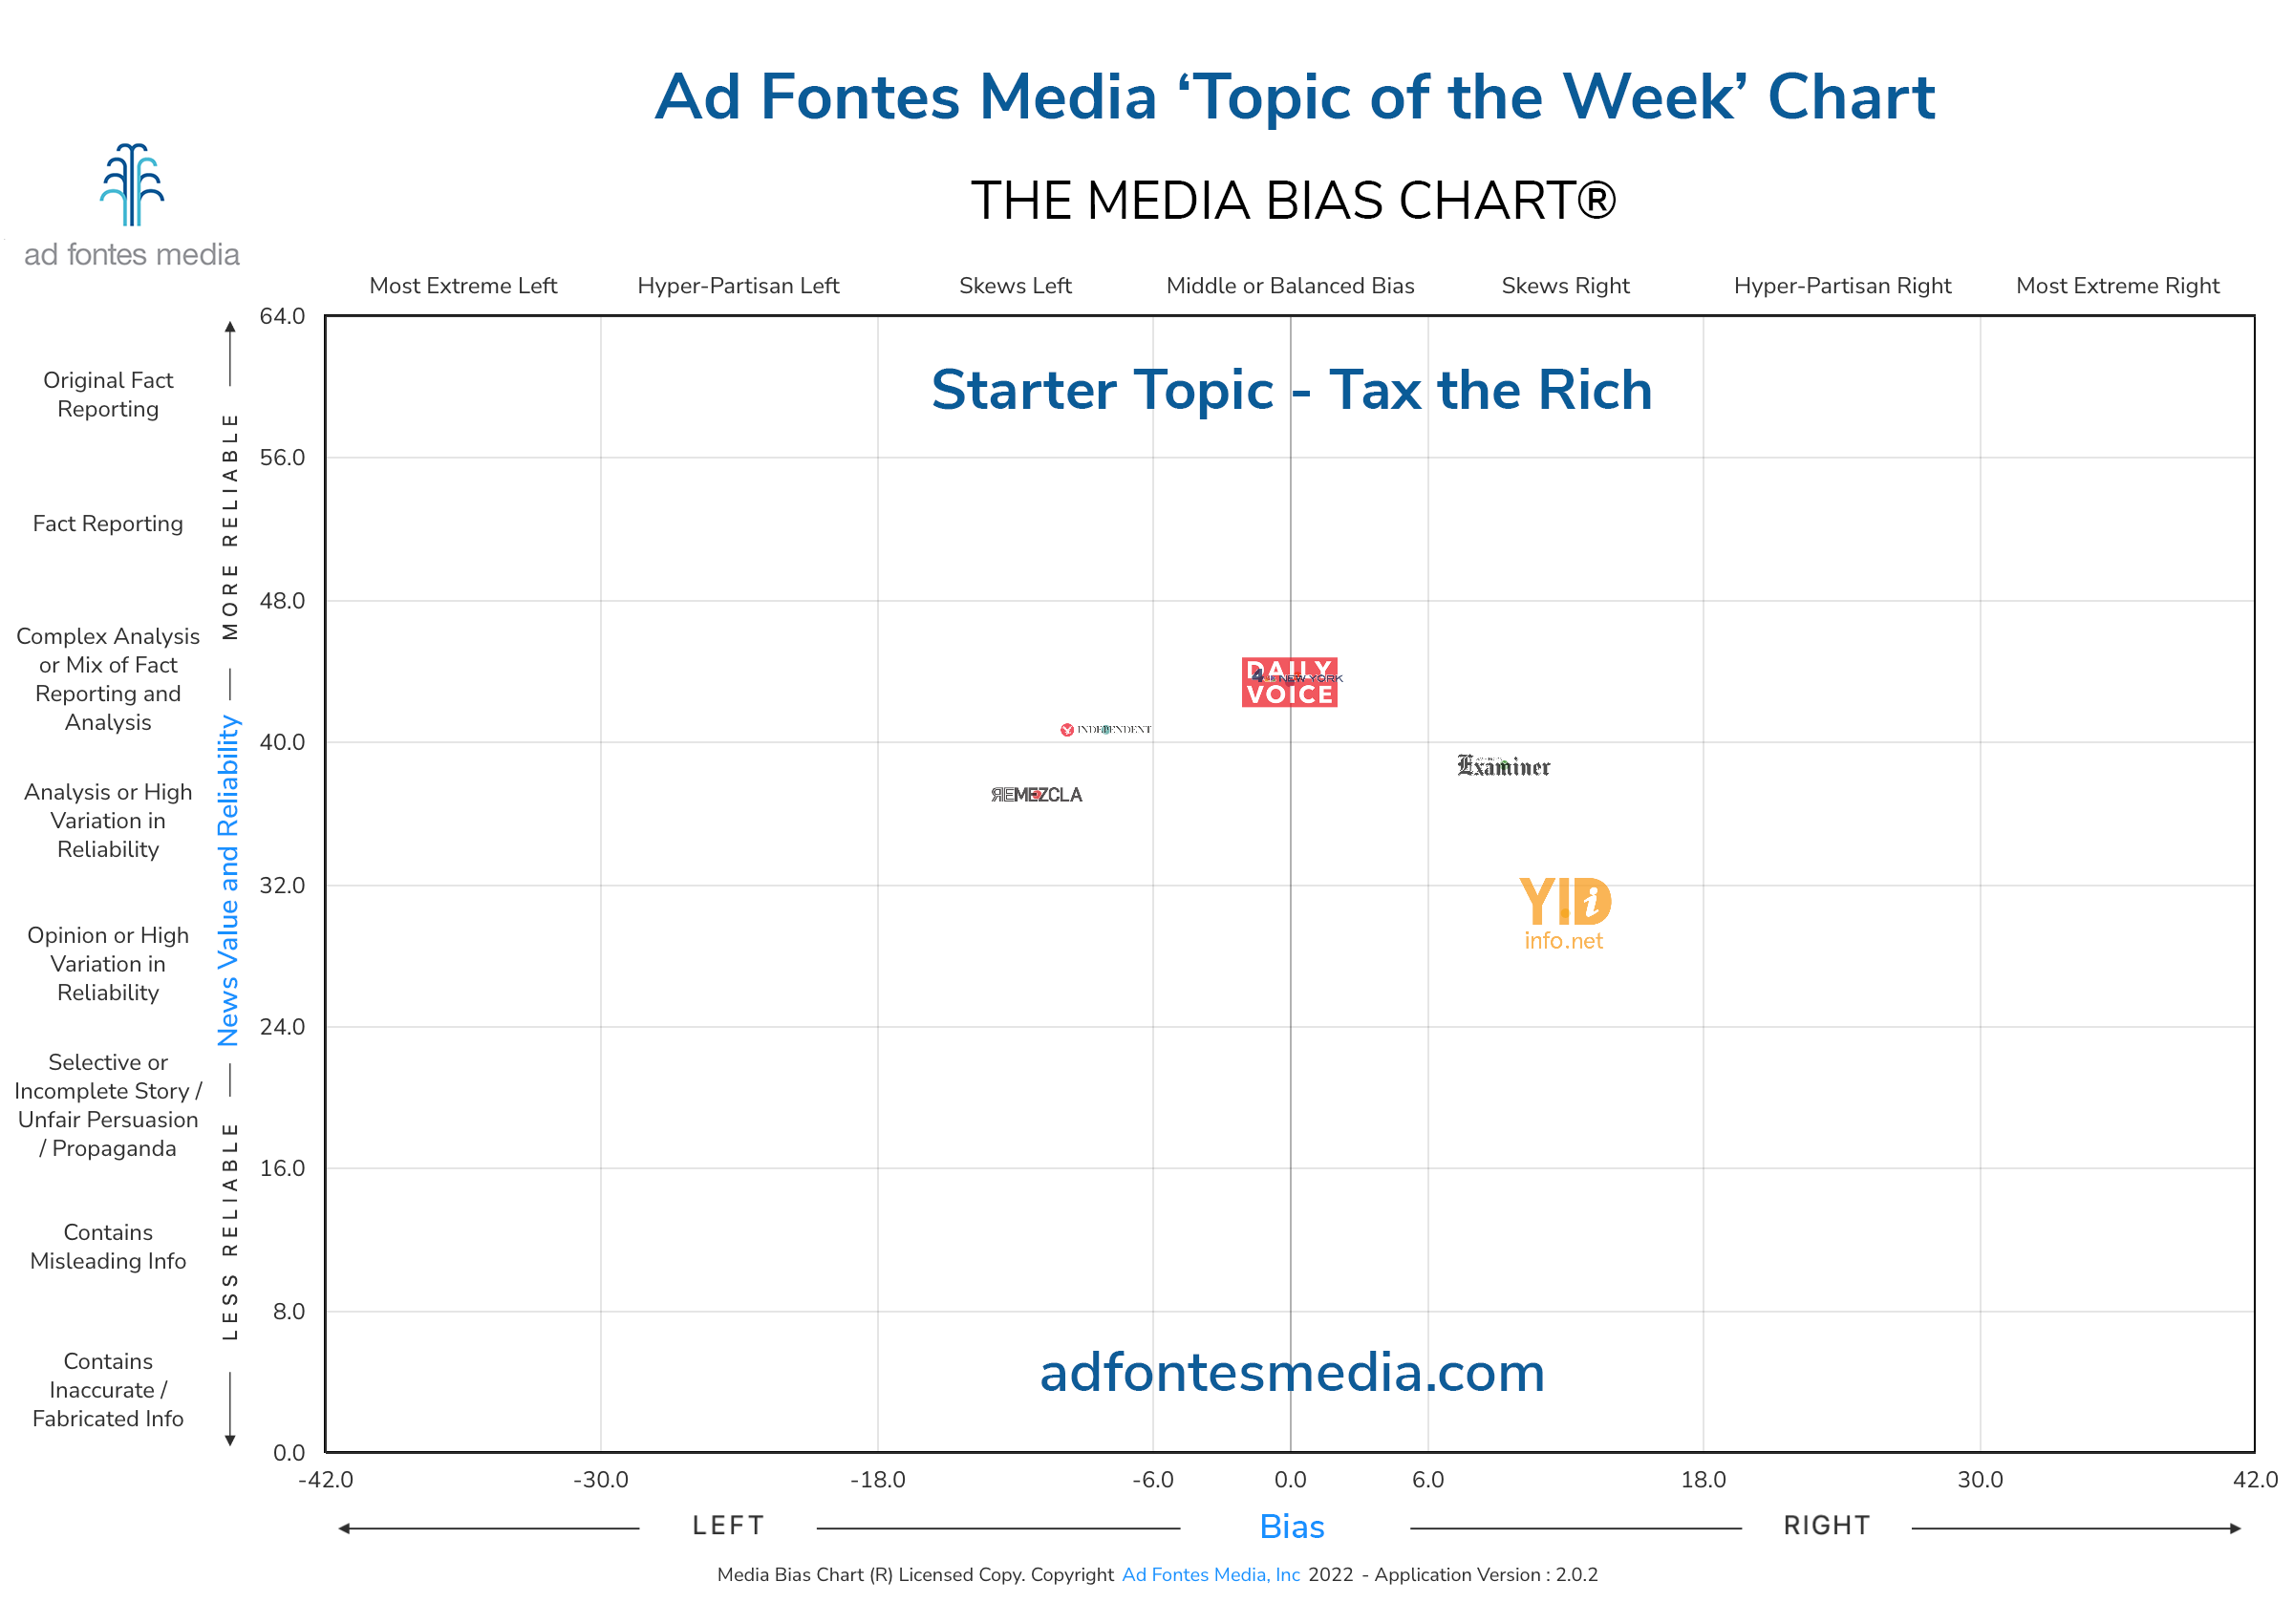 Scores of the Tax the Rich articles on the chart